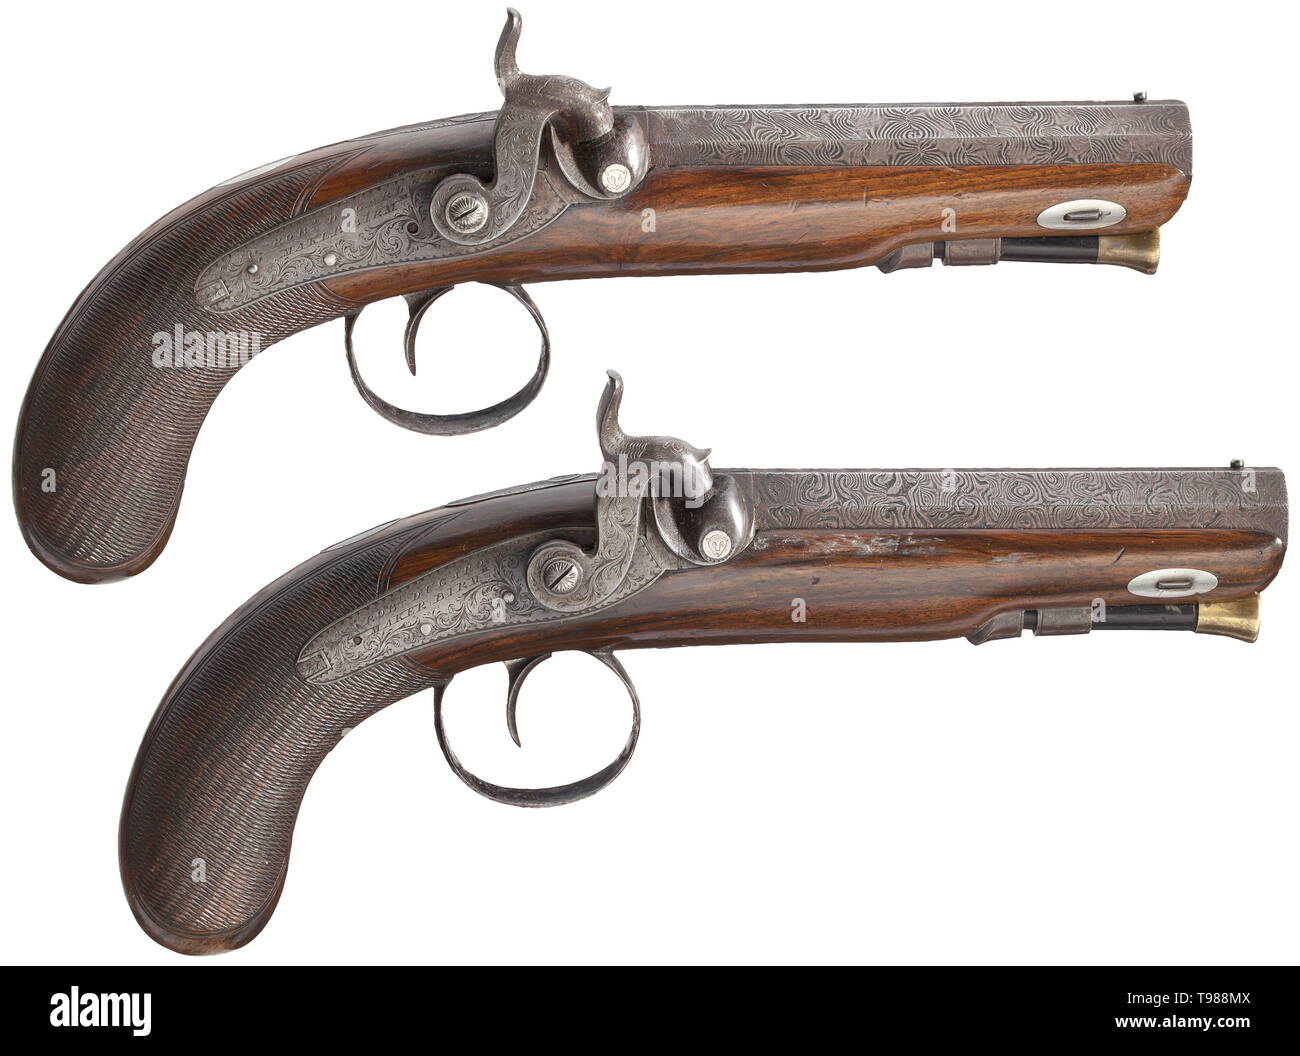 A pair of percussion pistols, Robert Dugard, Birmingham, circa 1833 - a present from the city of Birmingham to Constable G. C. Lingham Octagonal, smooth-bore Damascus barrels in 13 mm calibre with patent breechblocks. Florally engraved, back-action percussion locks, the lock plates signed 'ROBT. DUGARD MAKER BIRMM.' Walnut stocks with chequered butts and florally engraved trigger guards. Either pistol decorated on the opposite side of the lock with an engraved, inlaid silver plate reading 'G. C. LINGHAM CONSTABLE OF BIRMM: 1833 & 34.' Original ra, Additional-Rights-Clearance-Info-Not-Available Stock Photo